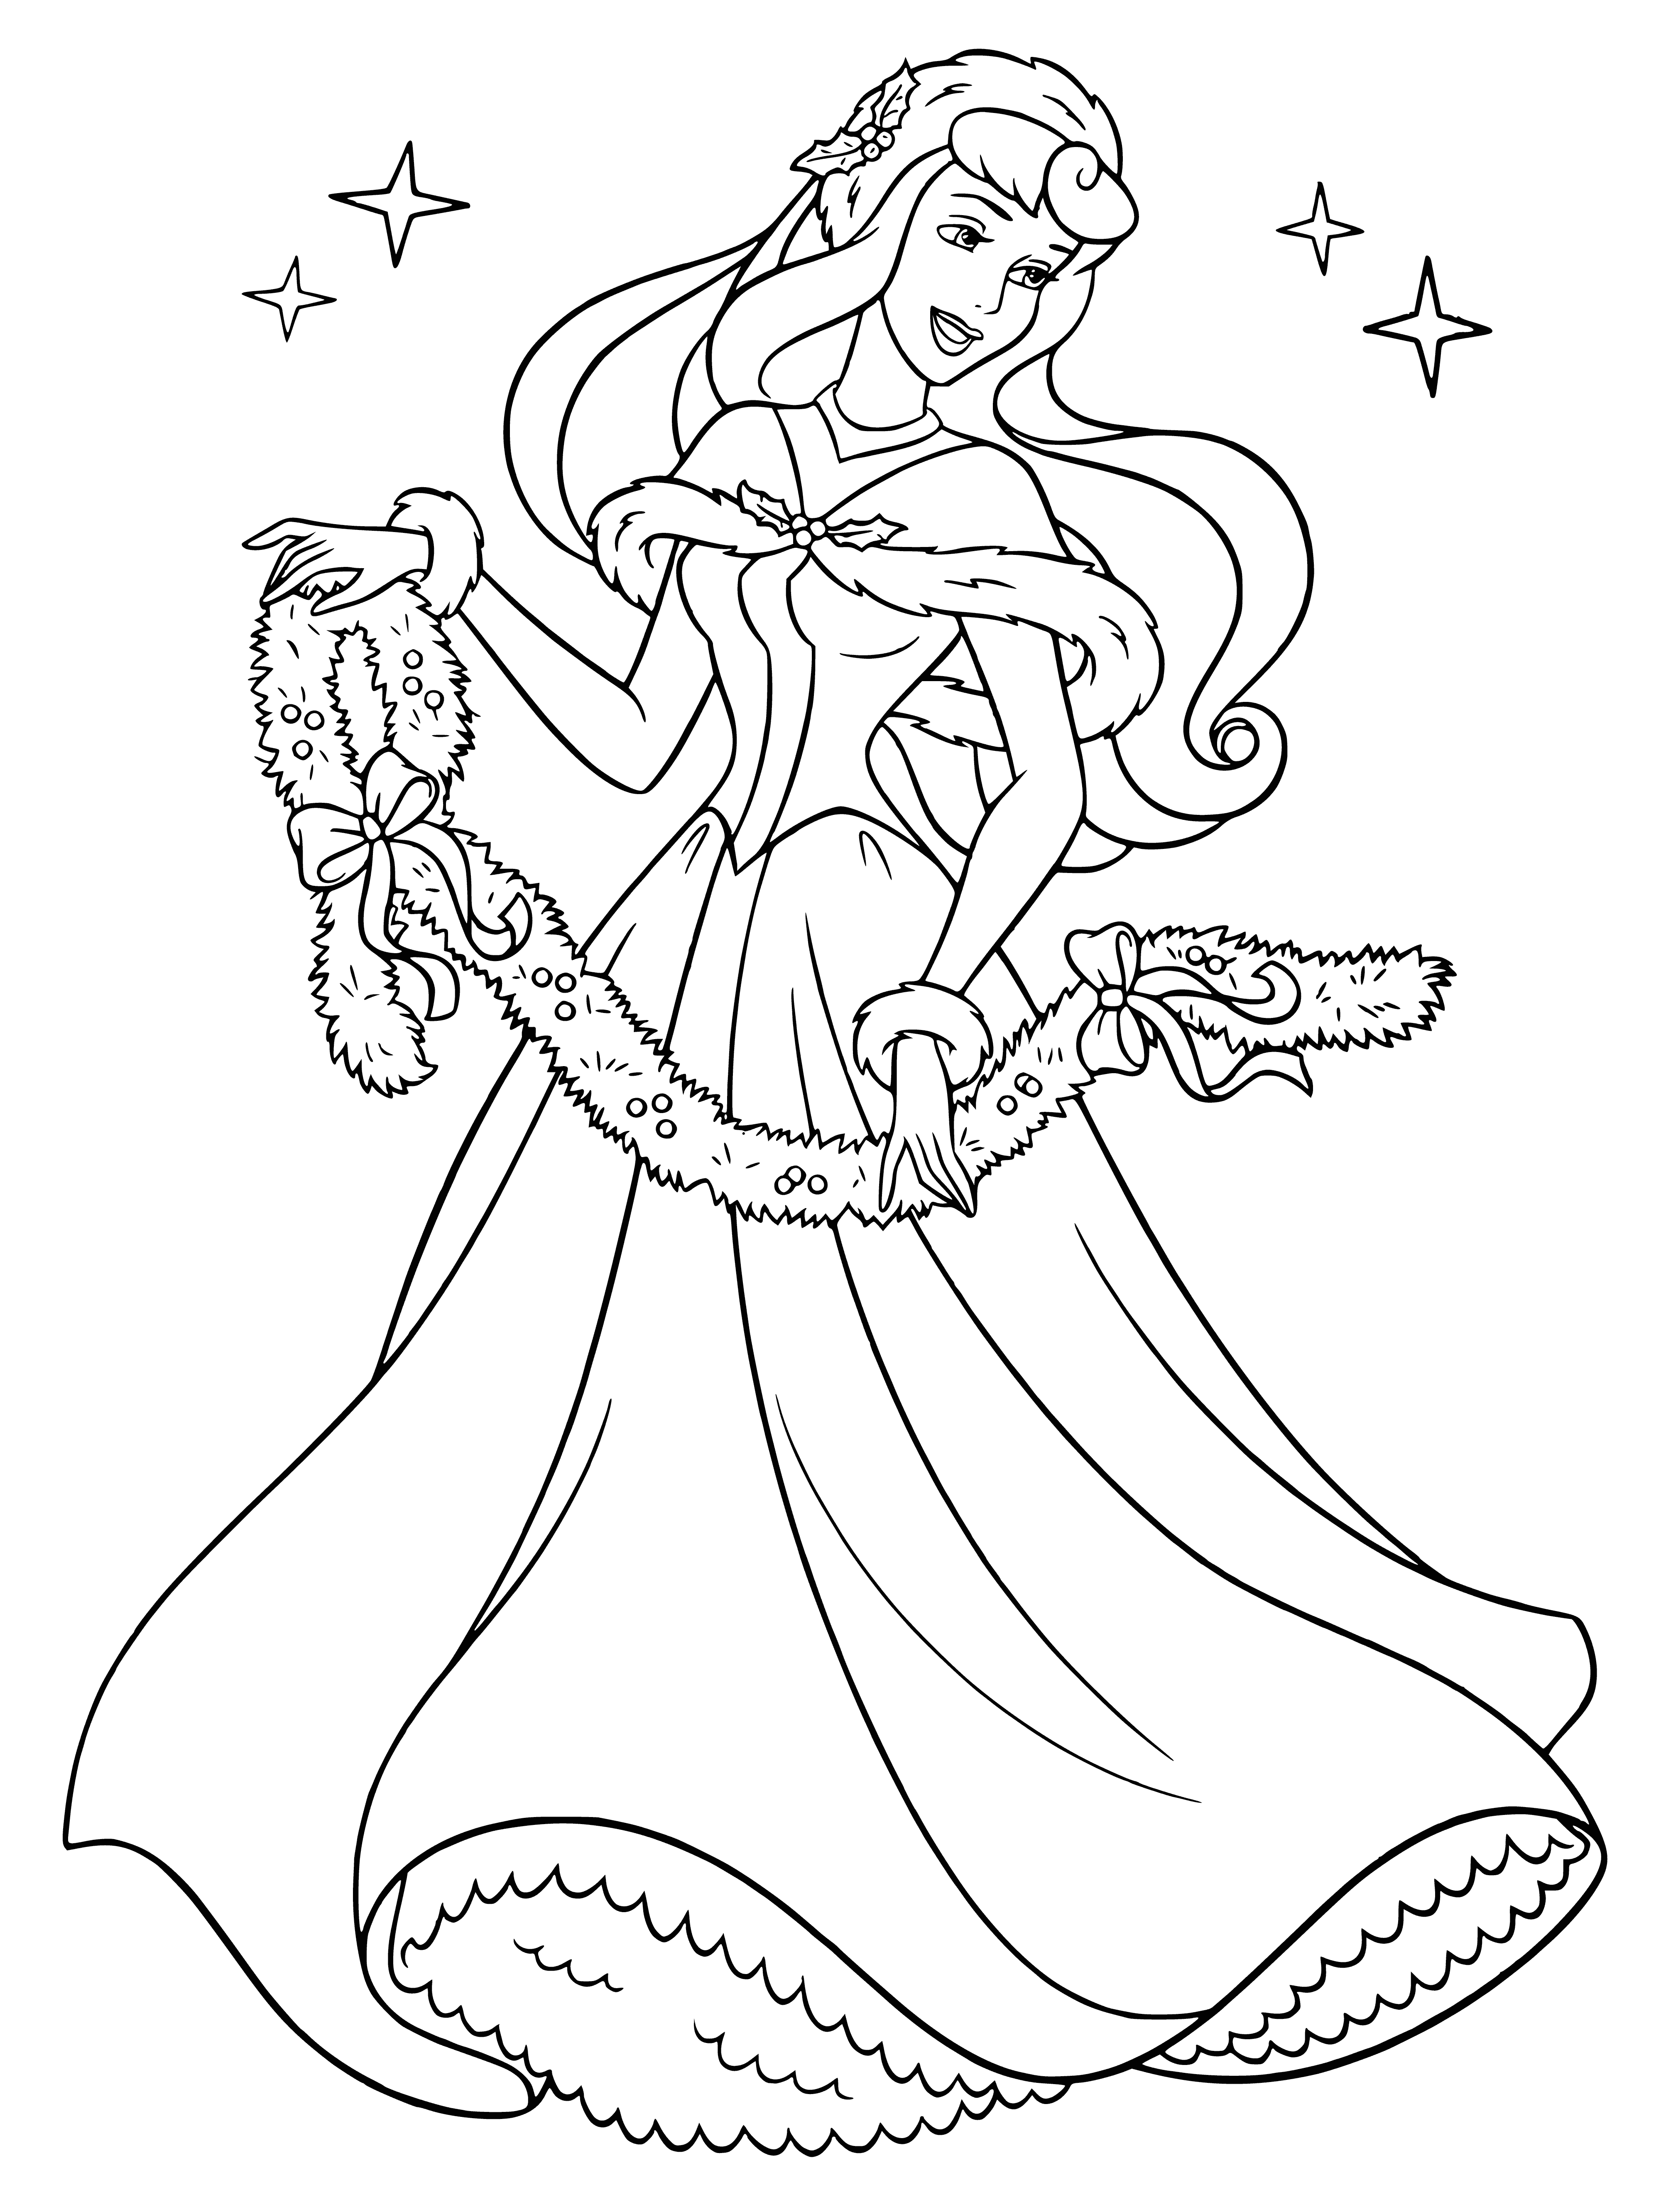 Princess Aurora in winter outfit coloring page